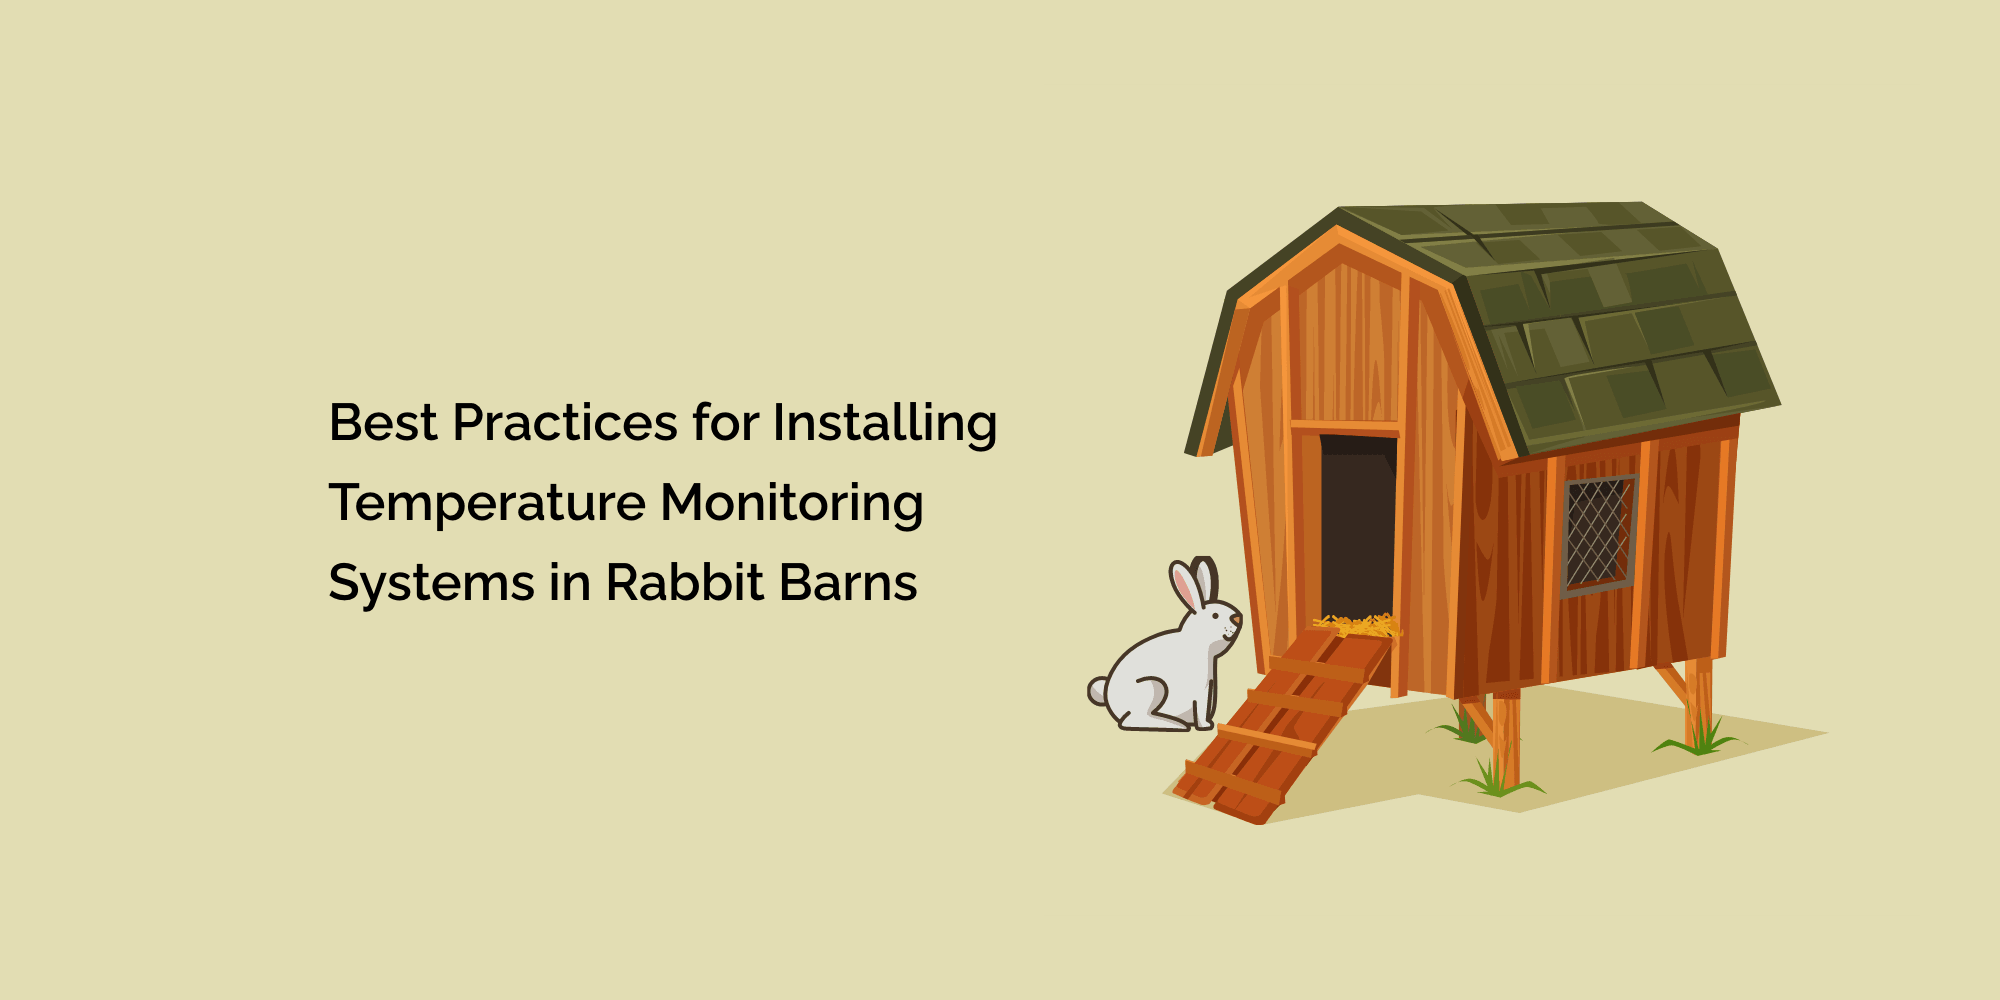 Best Practices for Installing Temperature Monitoring Systems in Rabbit Barns